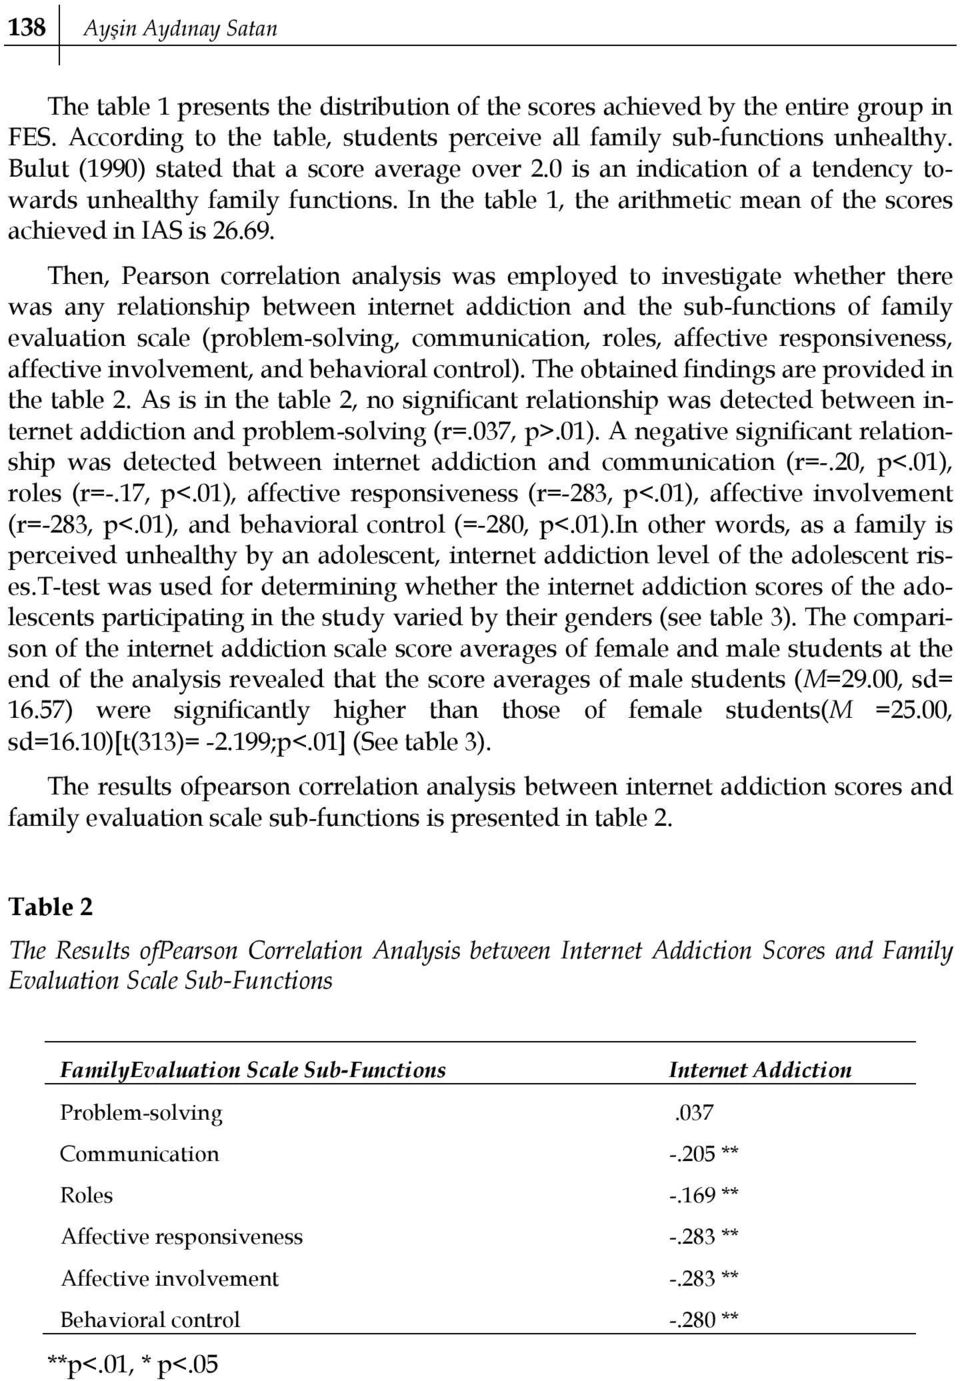 Then, Pearson correlation analysis was employed to investigate whether there was any relationship between internet addiction and the sub-functions of family evaluation scale (problem-solving,